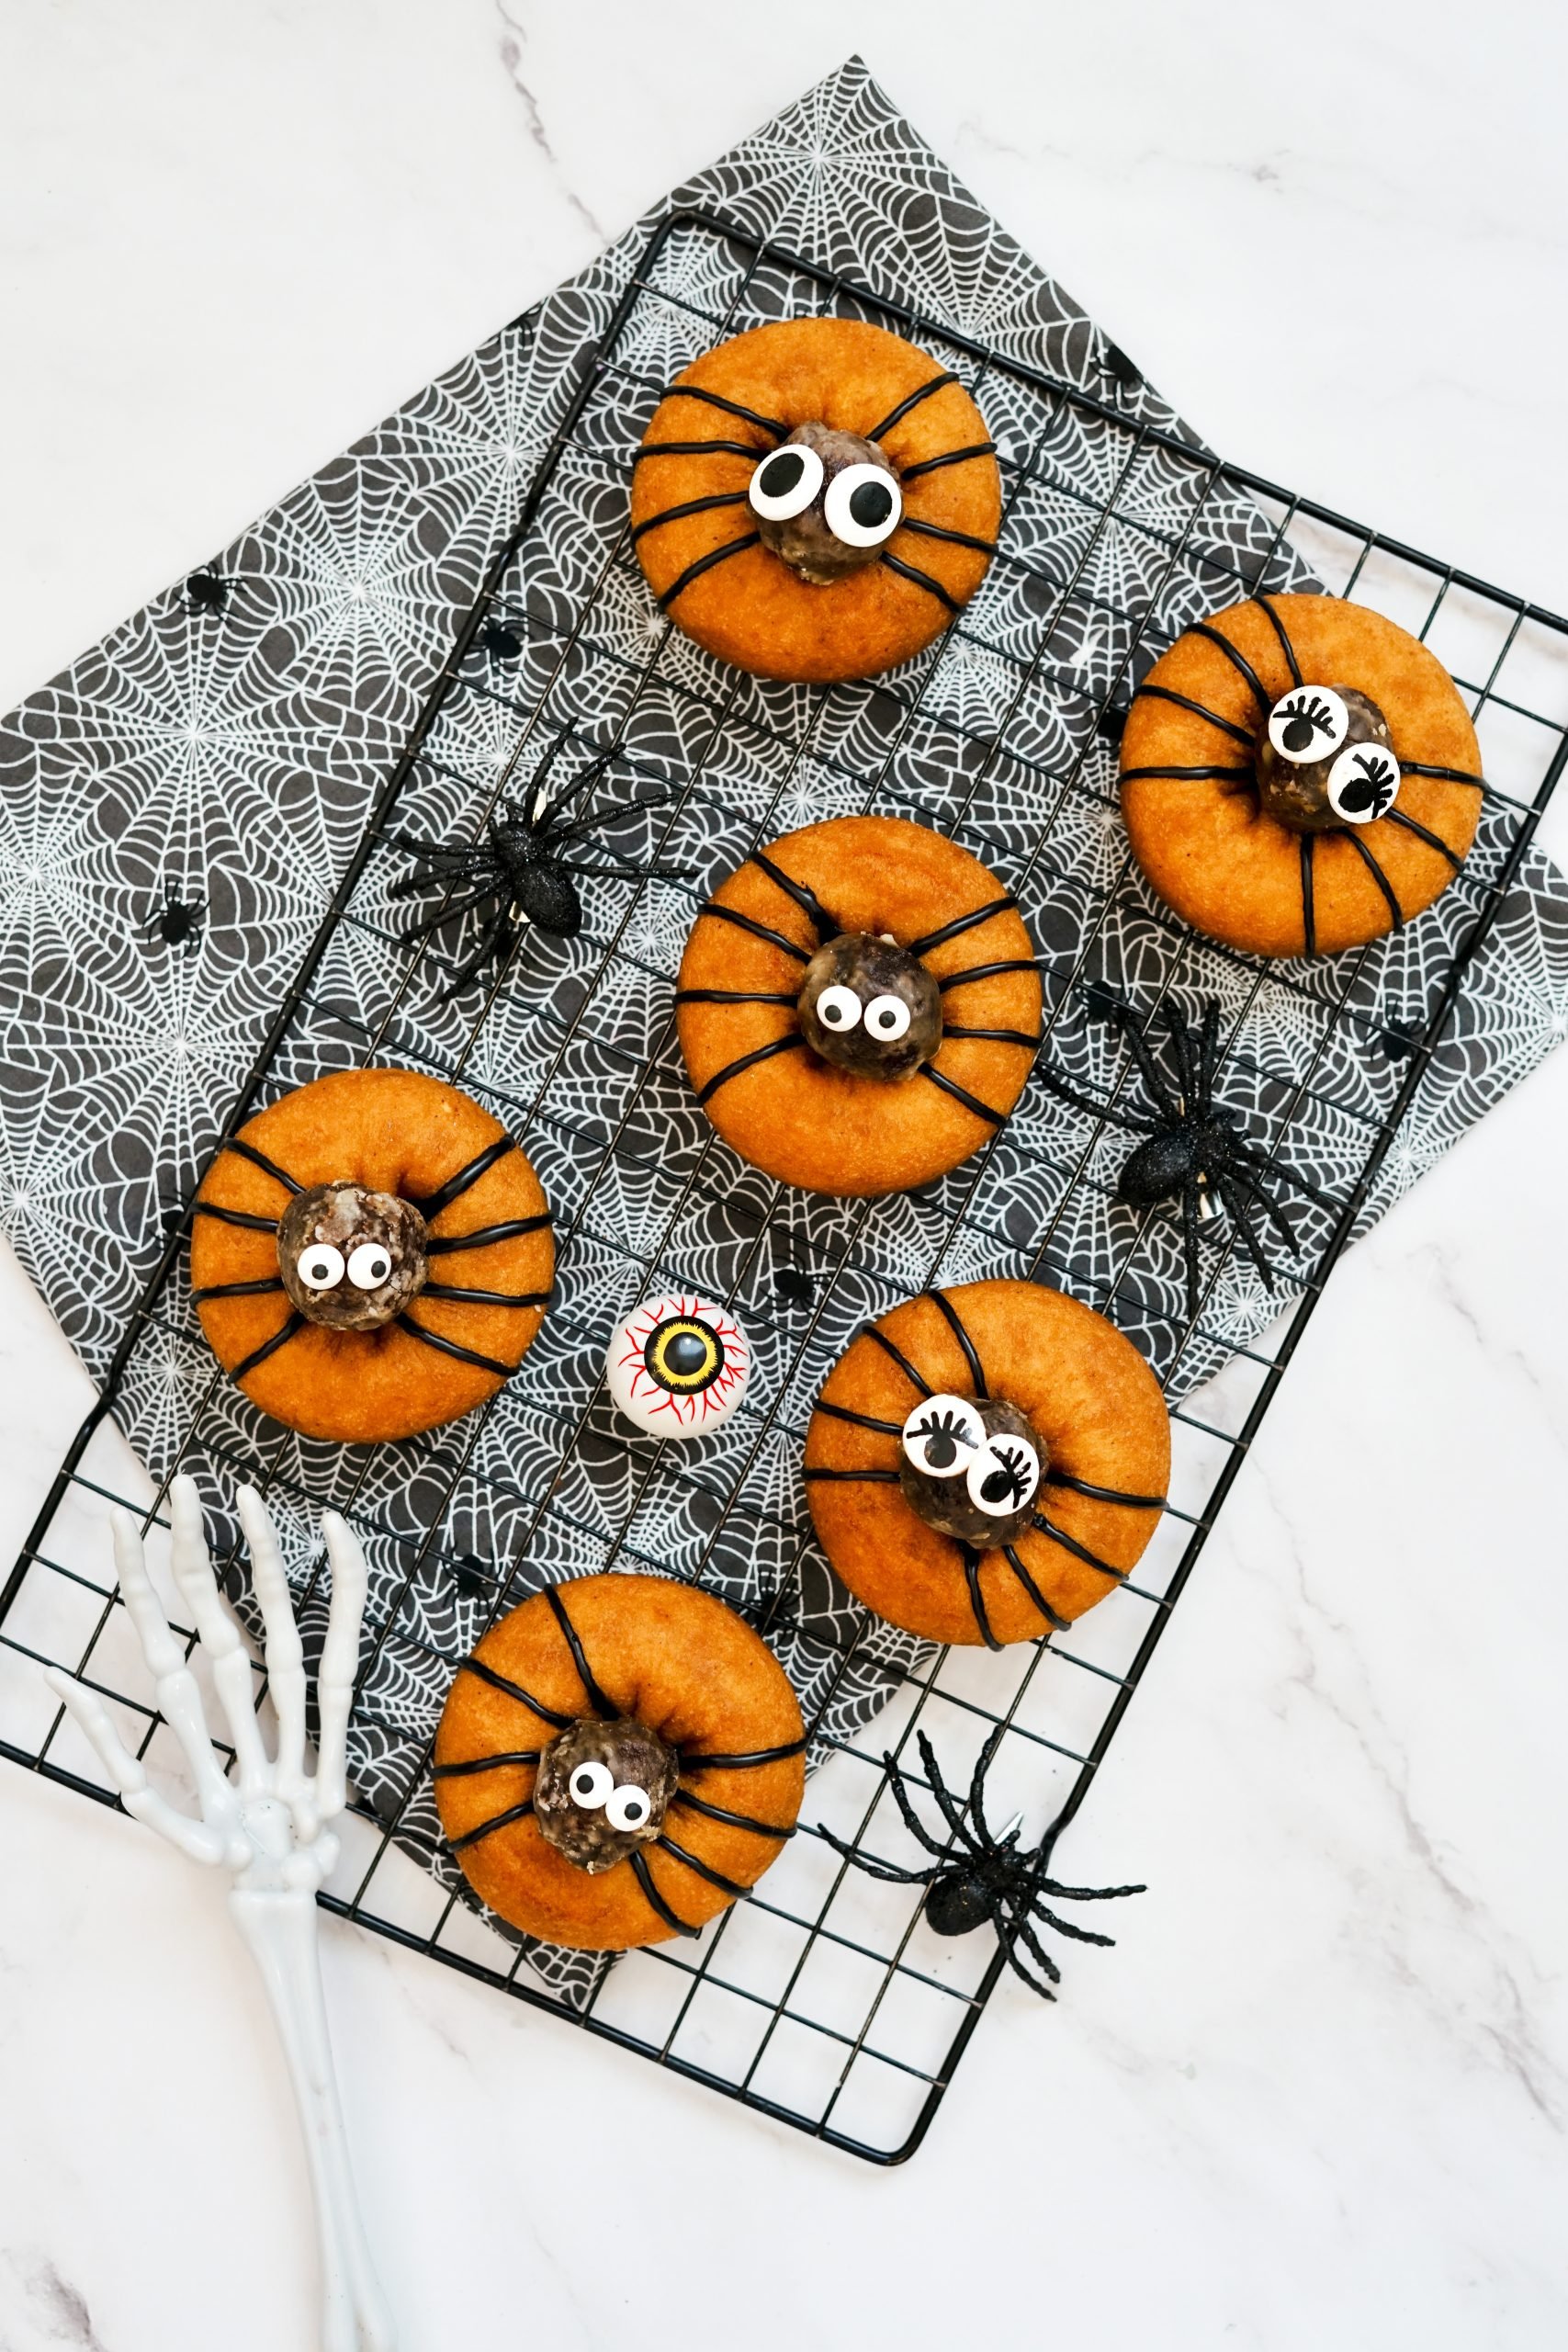 spooky spider donuts on tray with decor